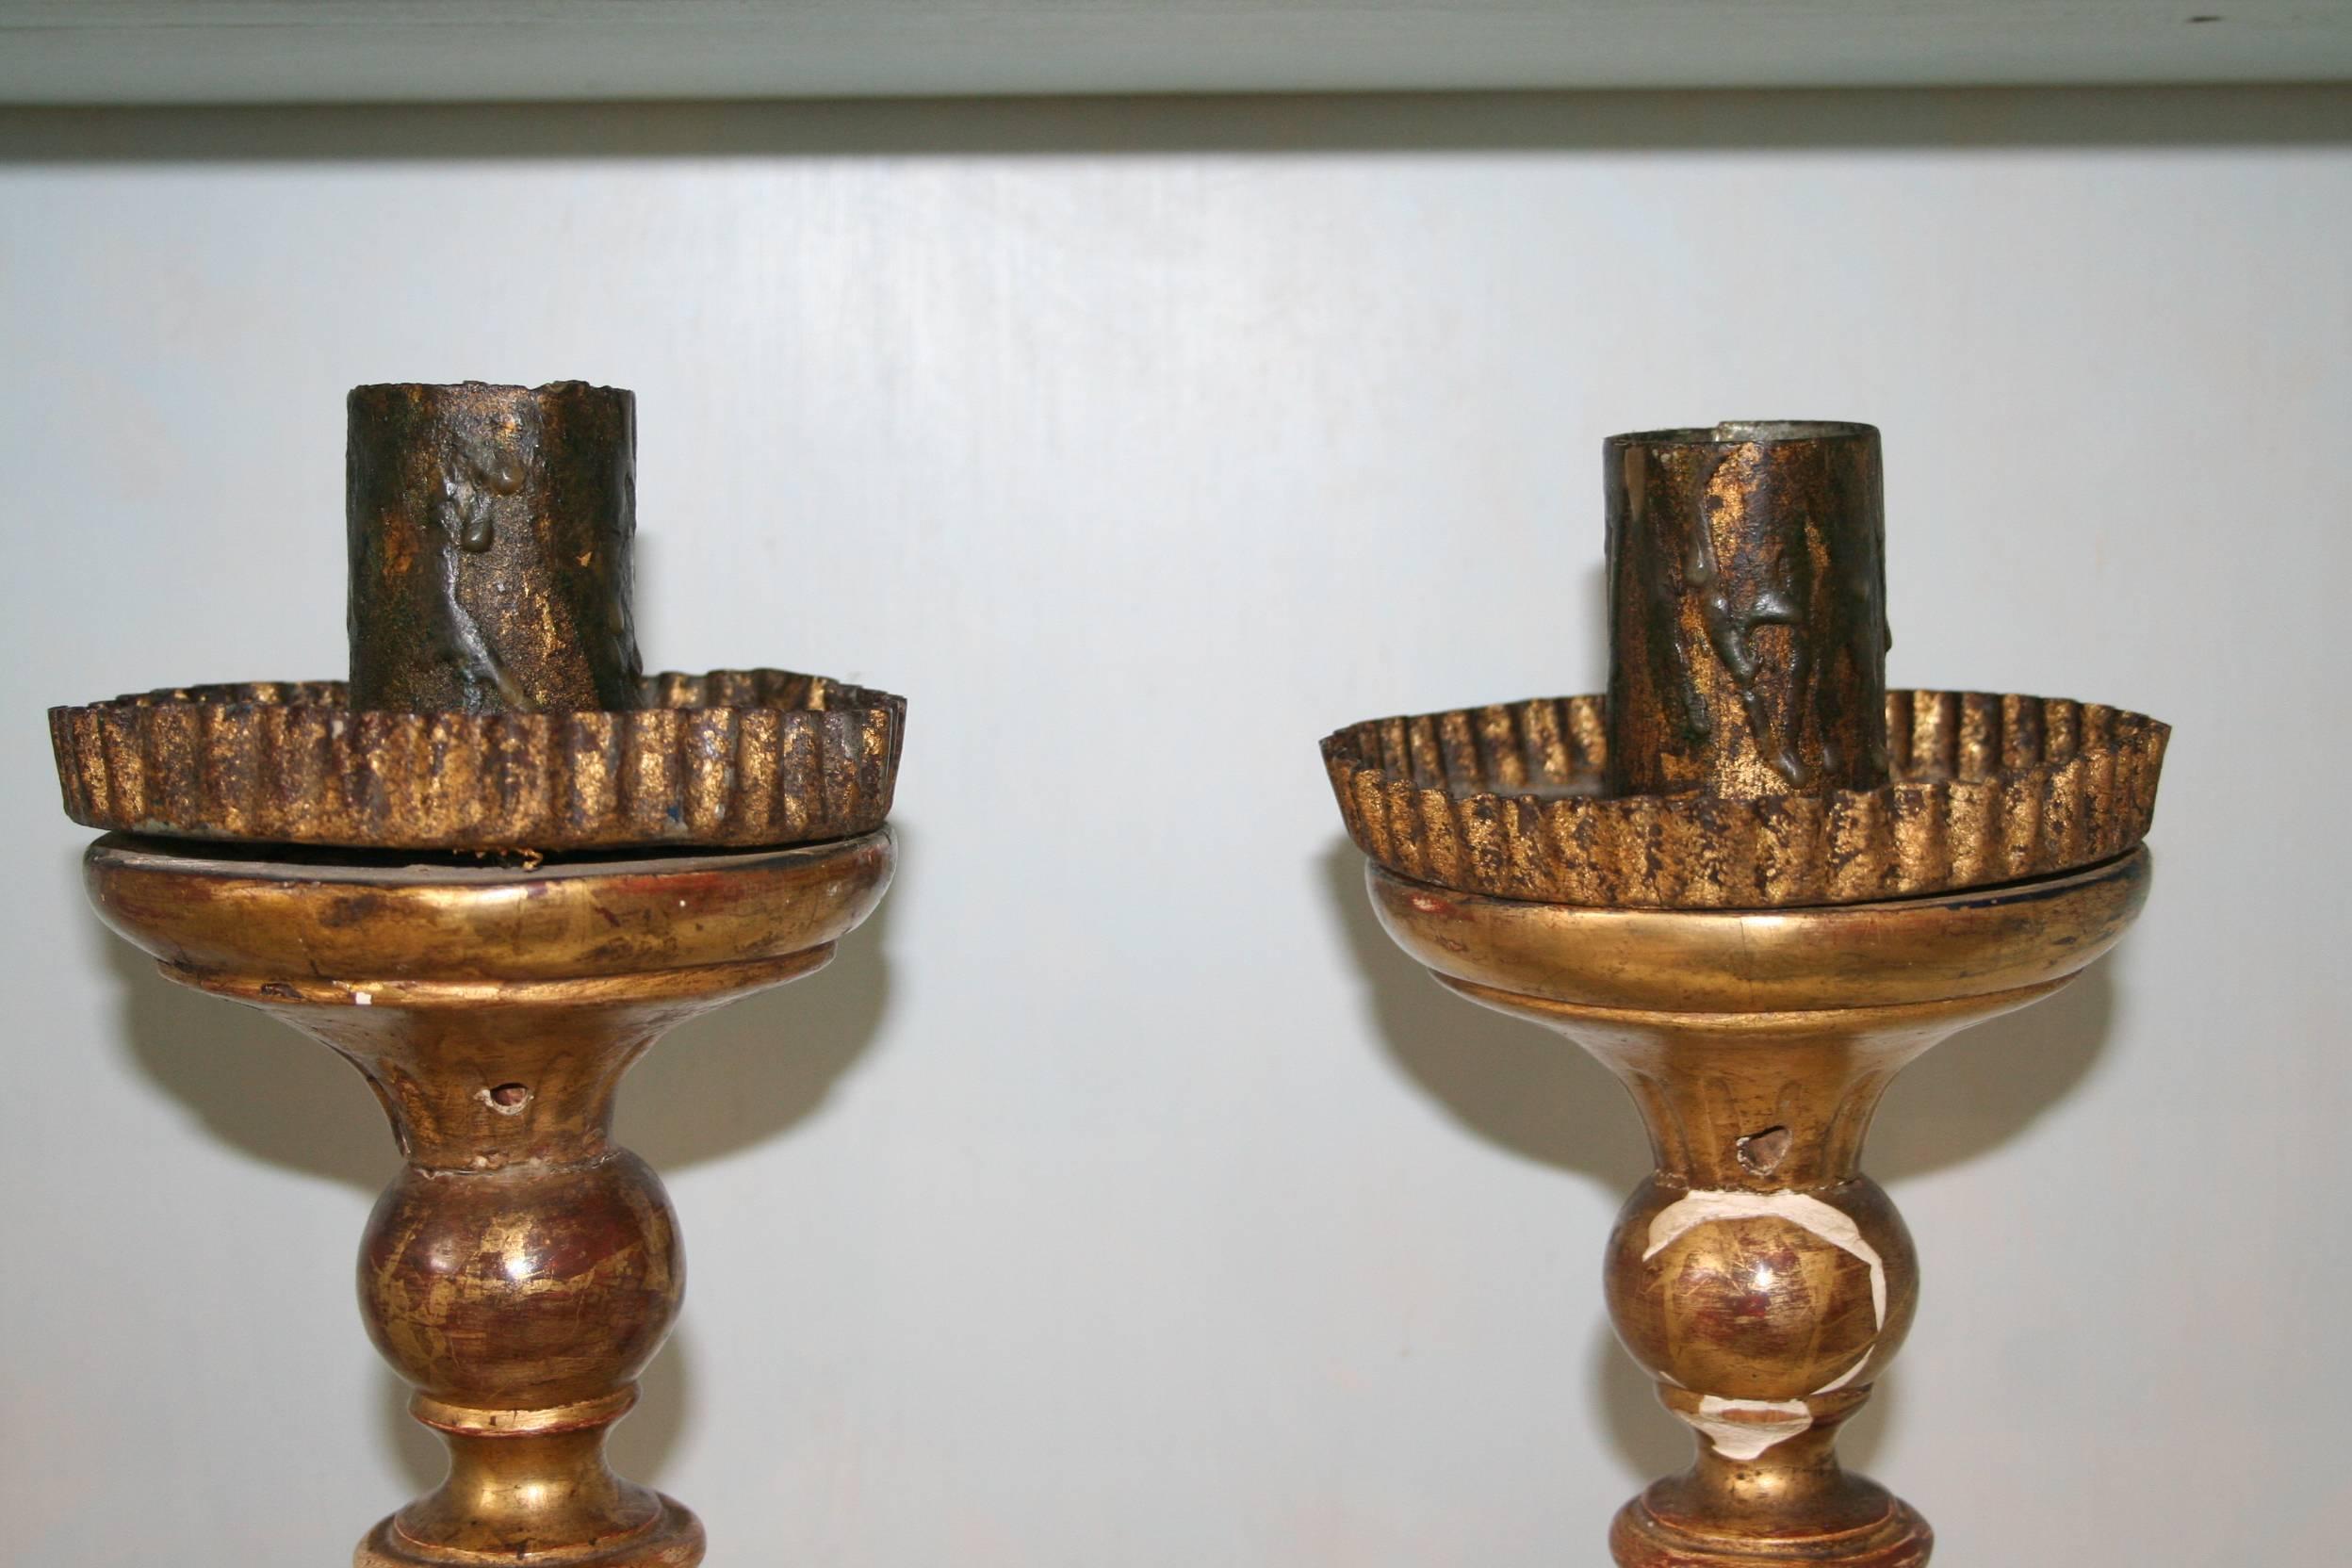 Carved Pair of 18th Century Candleholders